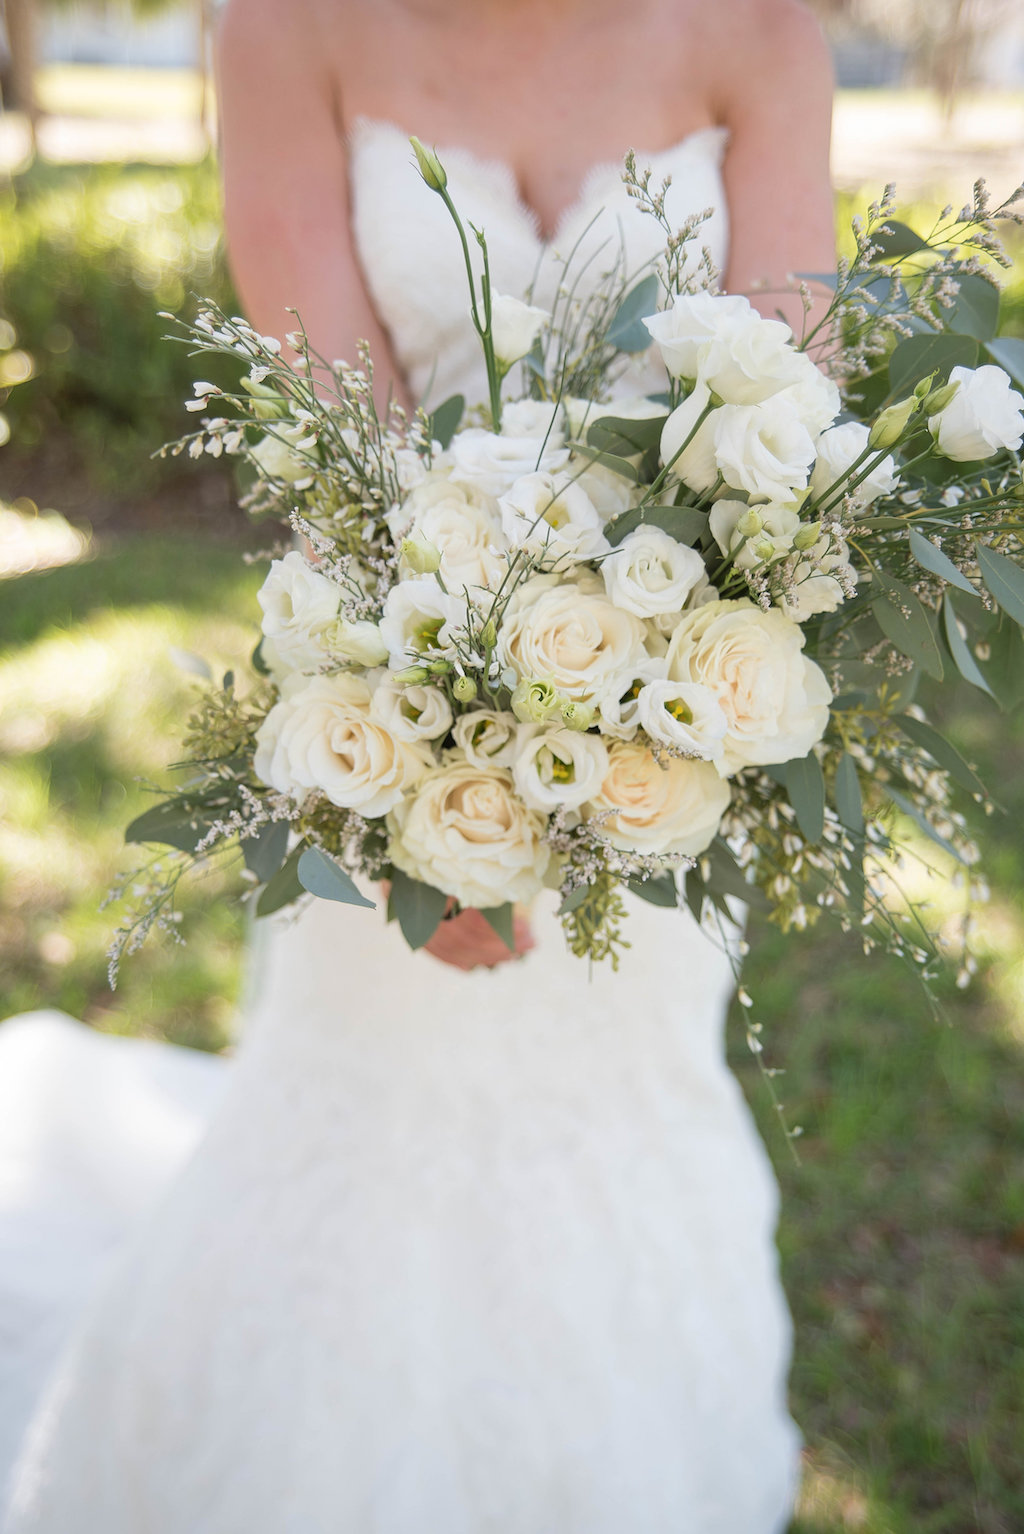 Outdoor Portrait of Bride with White Rose and Floral with Wild Natural Greenery Bouquet | Sarasota Wedding Photographer Kristen Marie Photographer